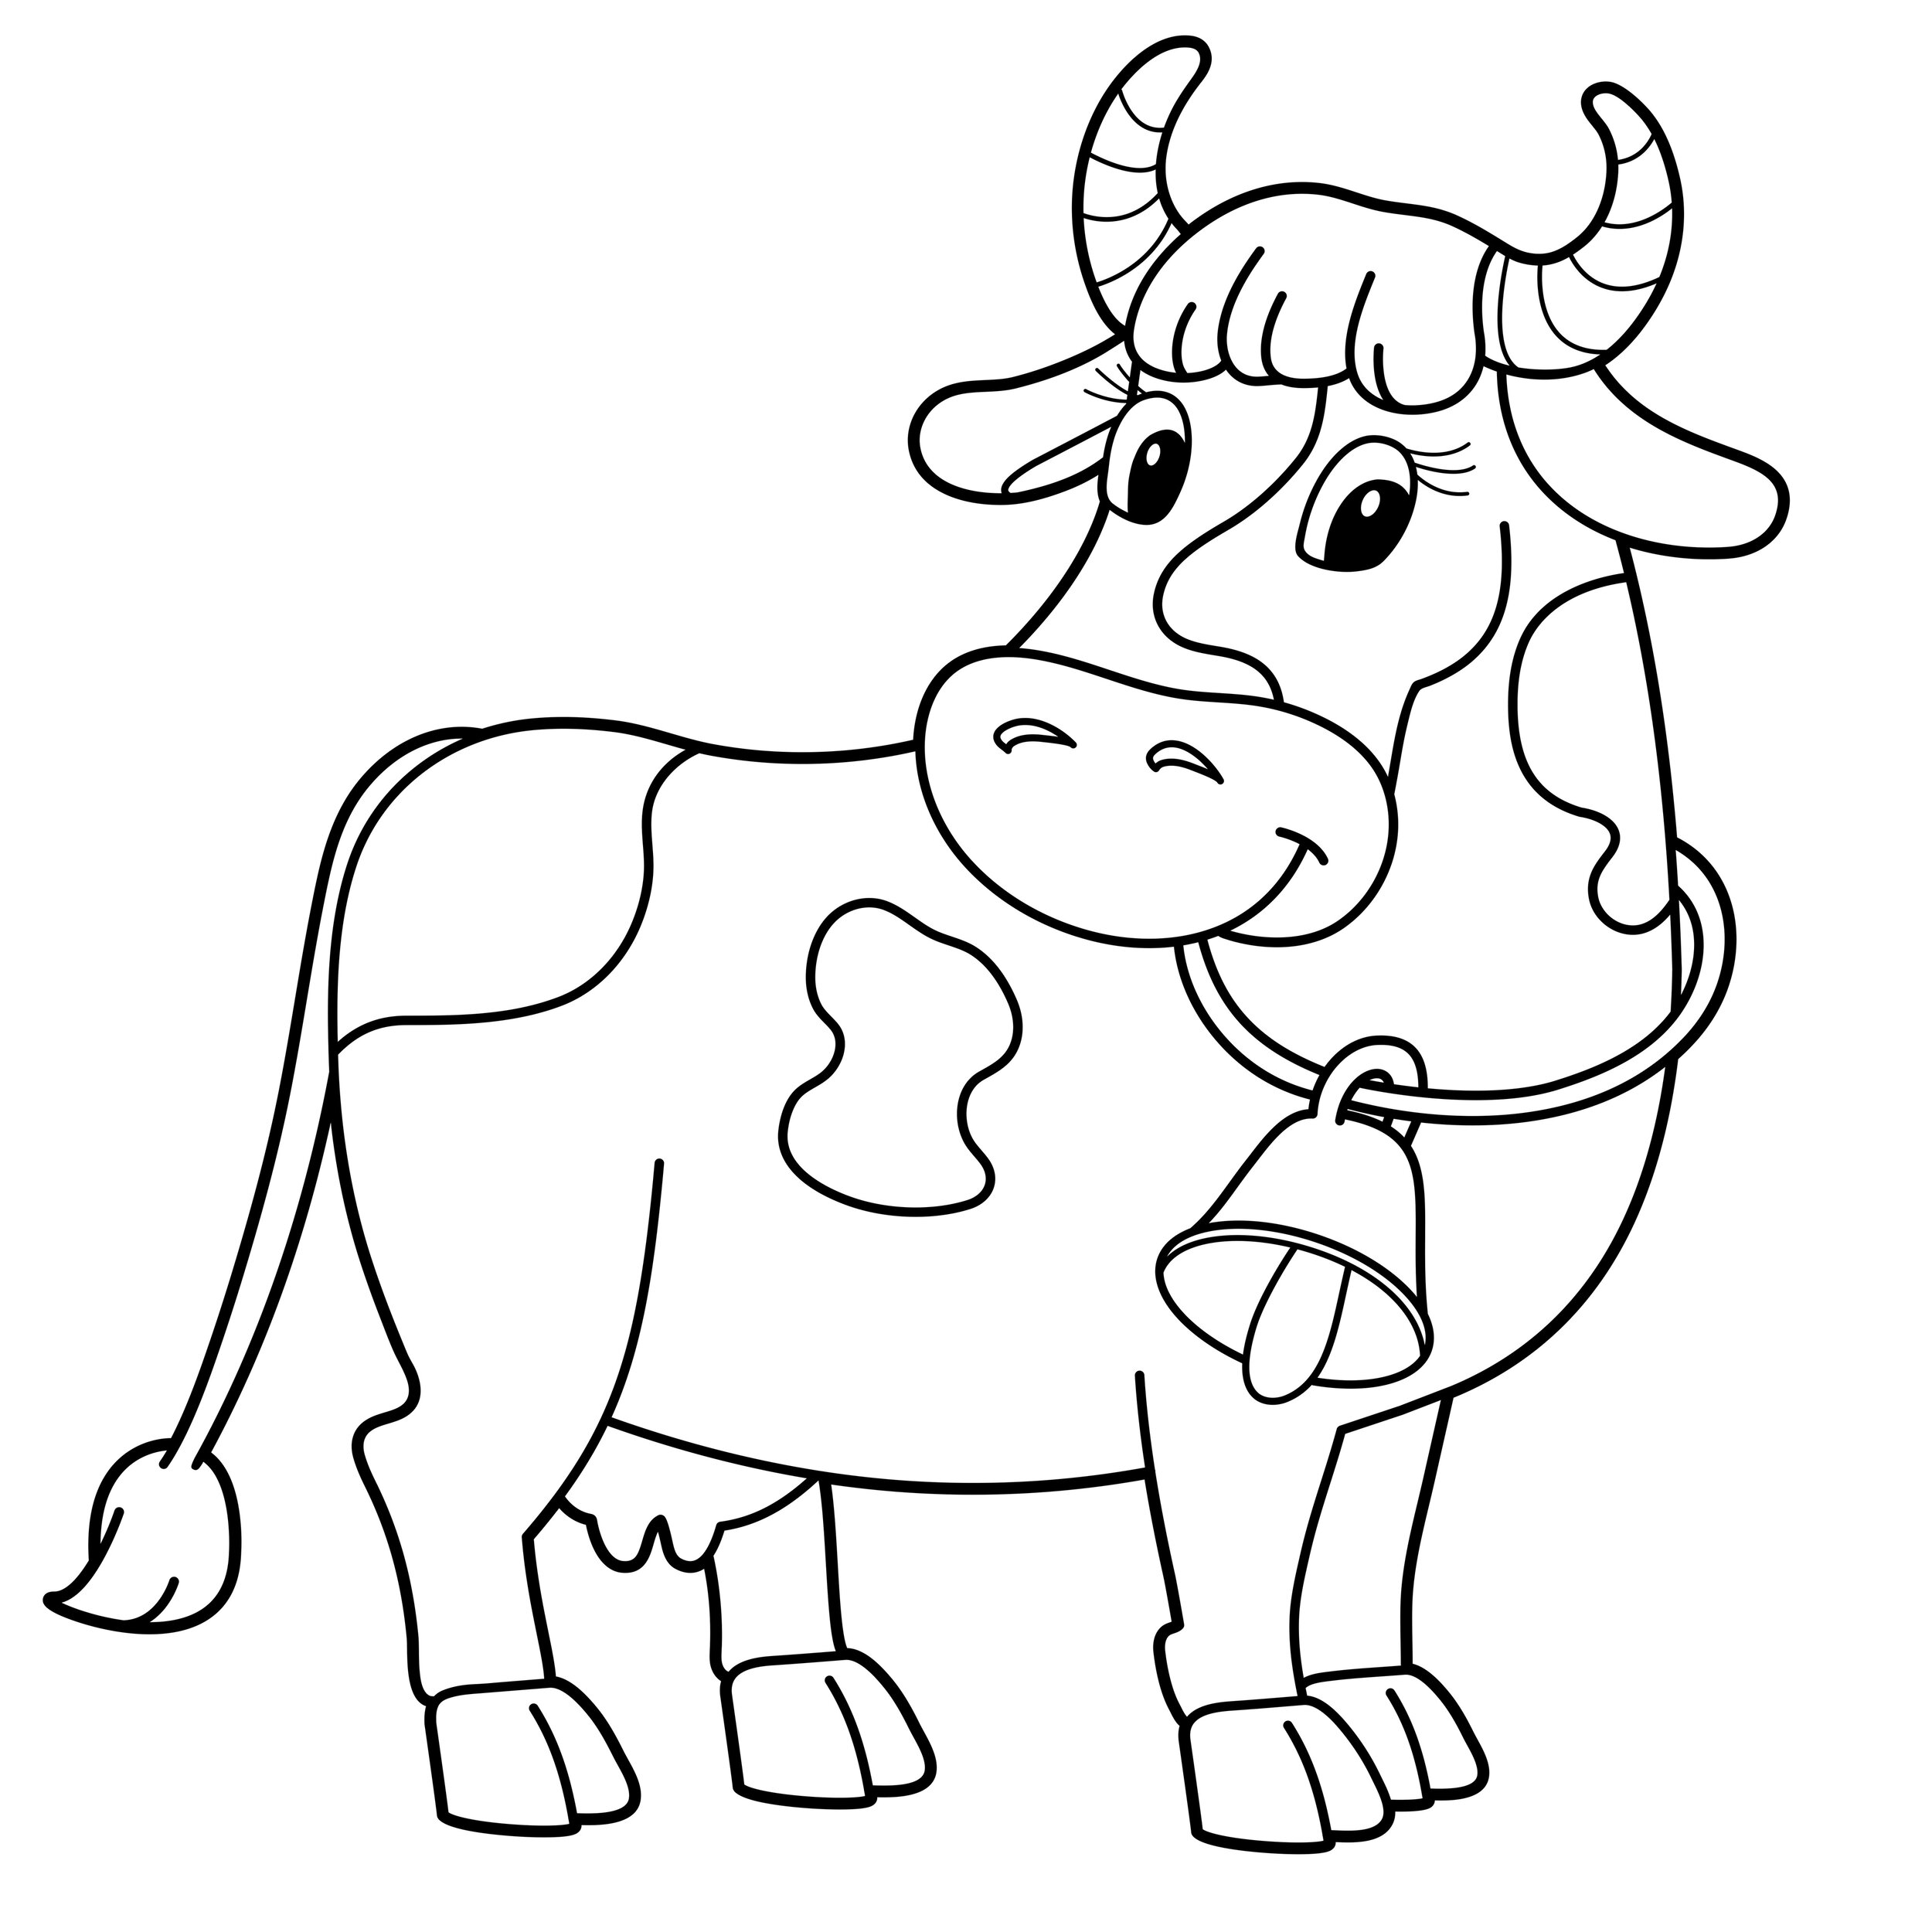 Lengthen Planet Purchase coloring pages for kids to print animals ...